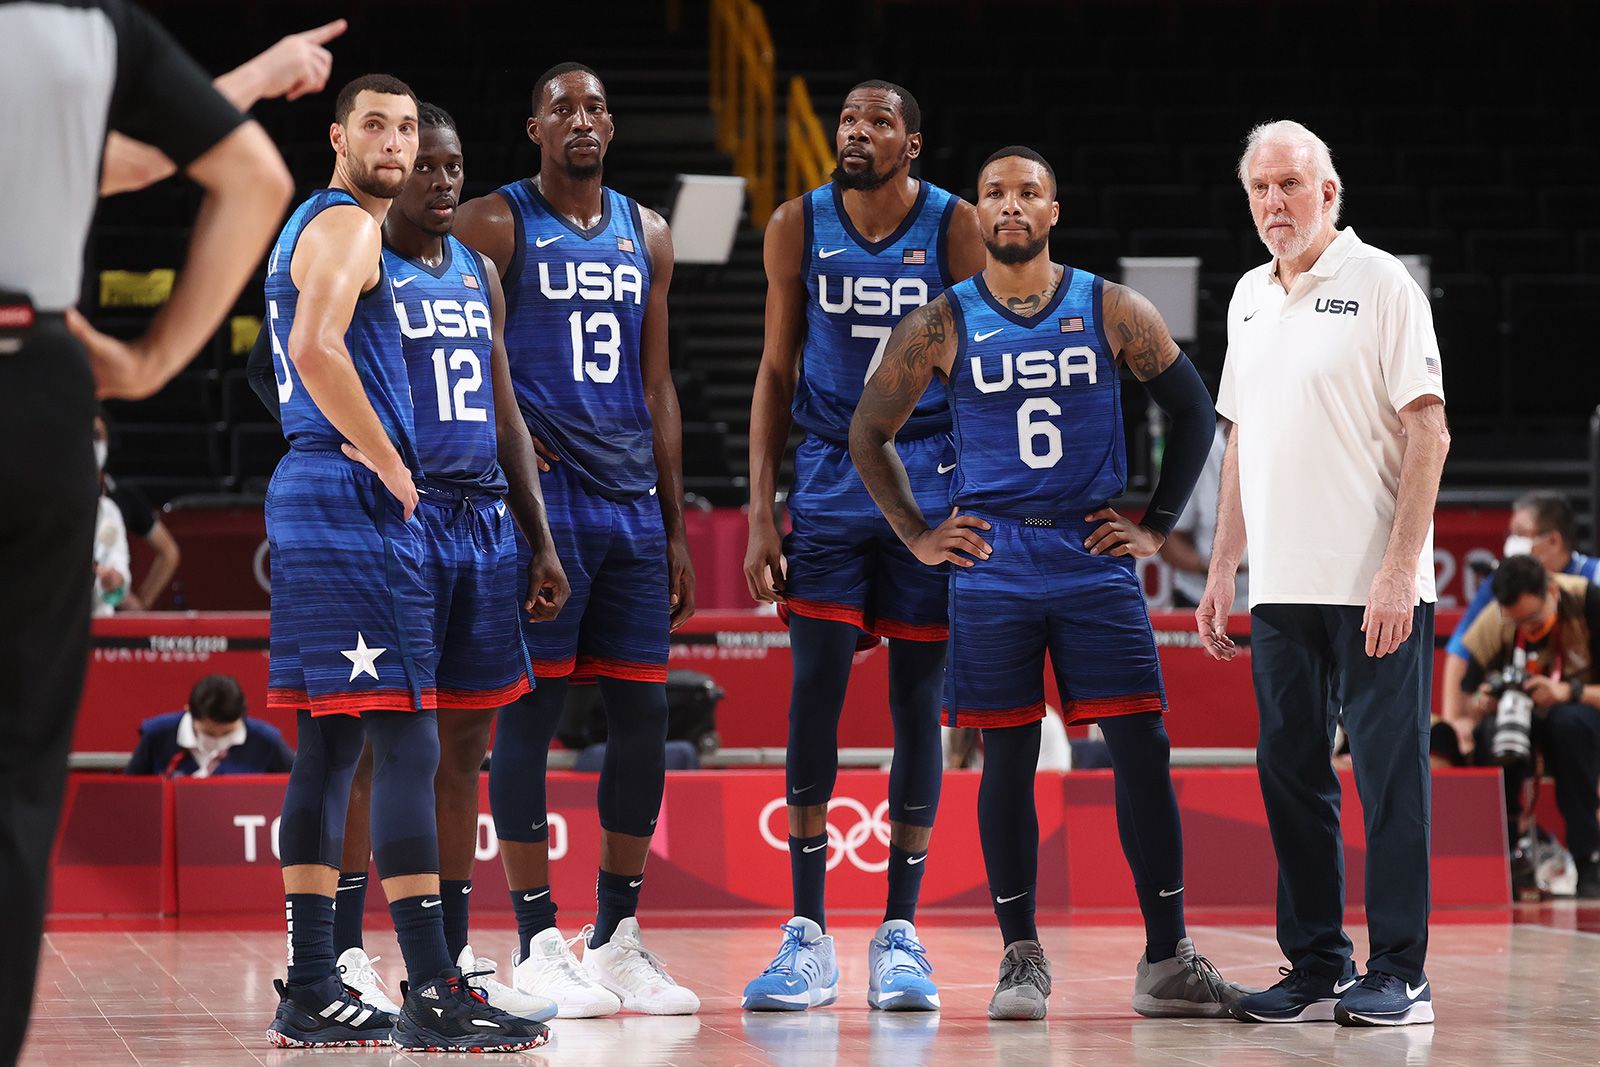 U.S. Men's Basketball Loses to France in Olympic Opener, 83-76